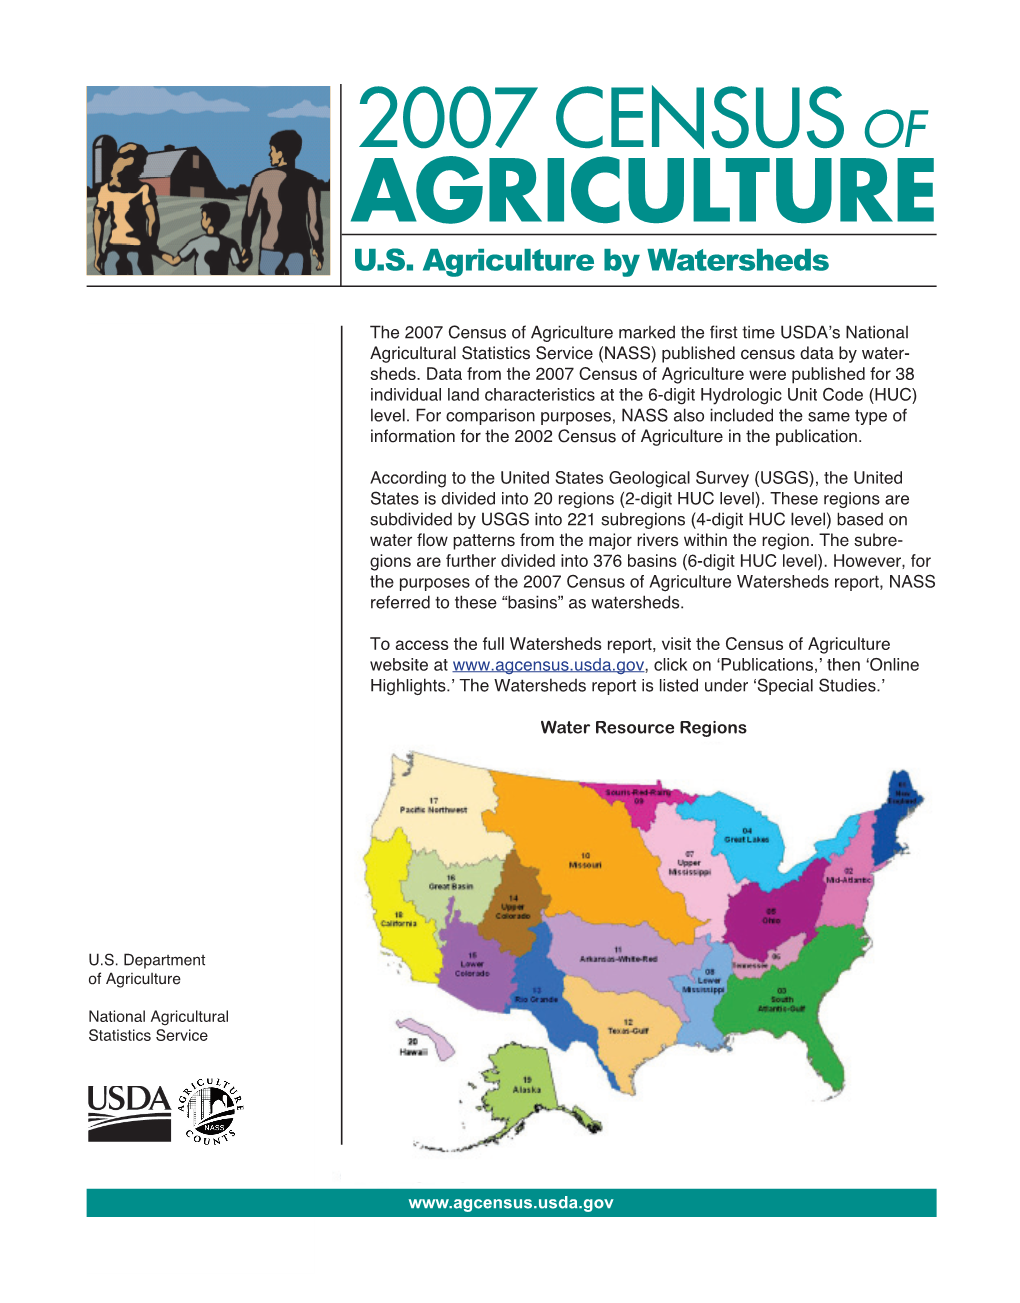 U.S. Agriculture by Watersheds